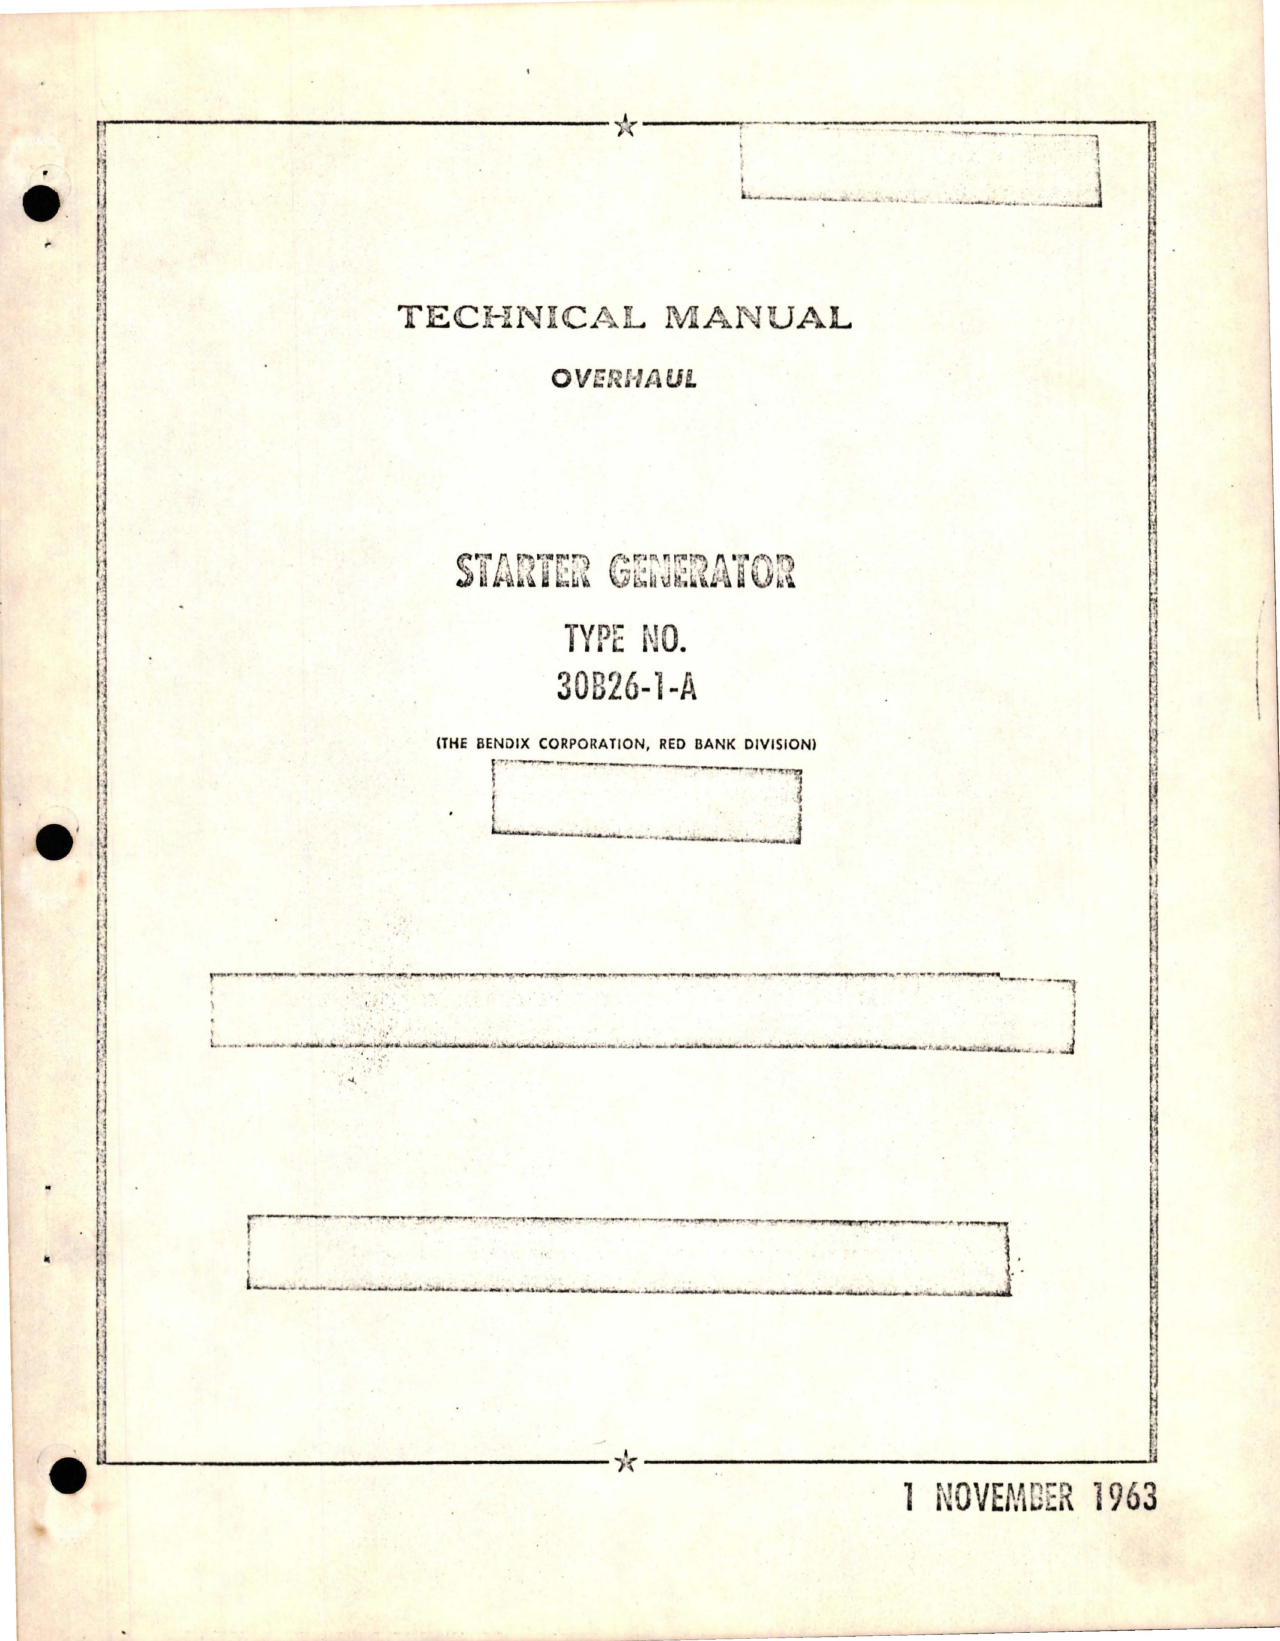 Sample page 1 from AirCorps Library document: Overhaul for Starter Generator - Type 30B26-1-A